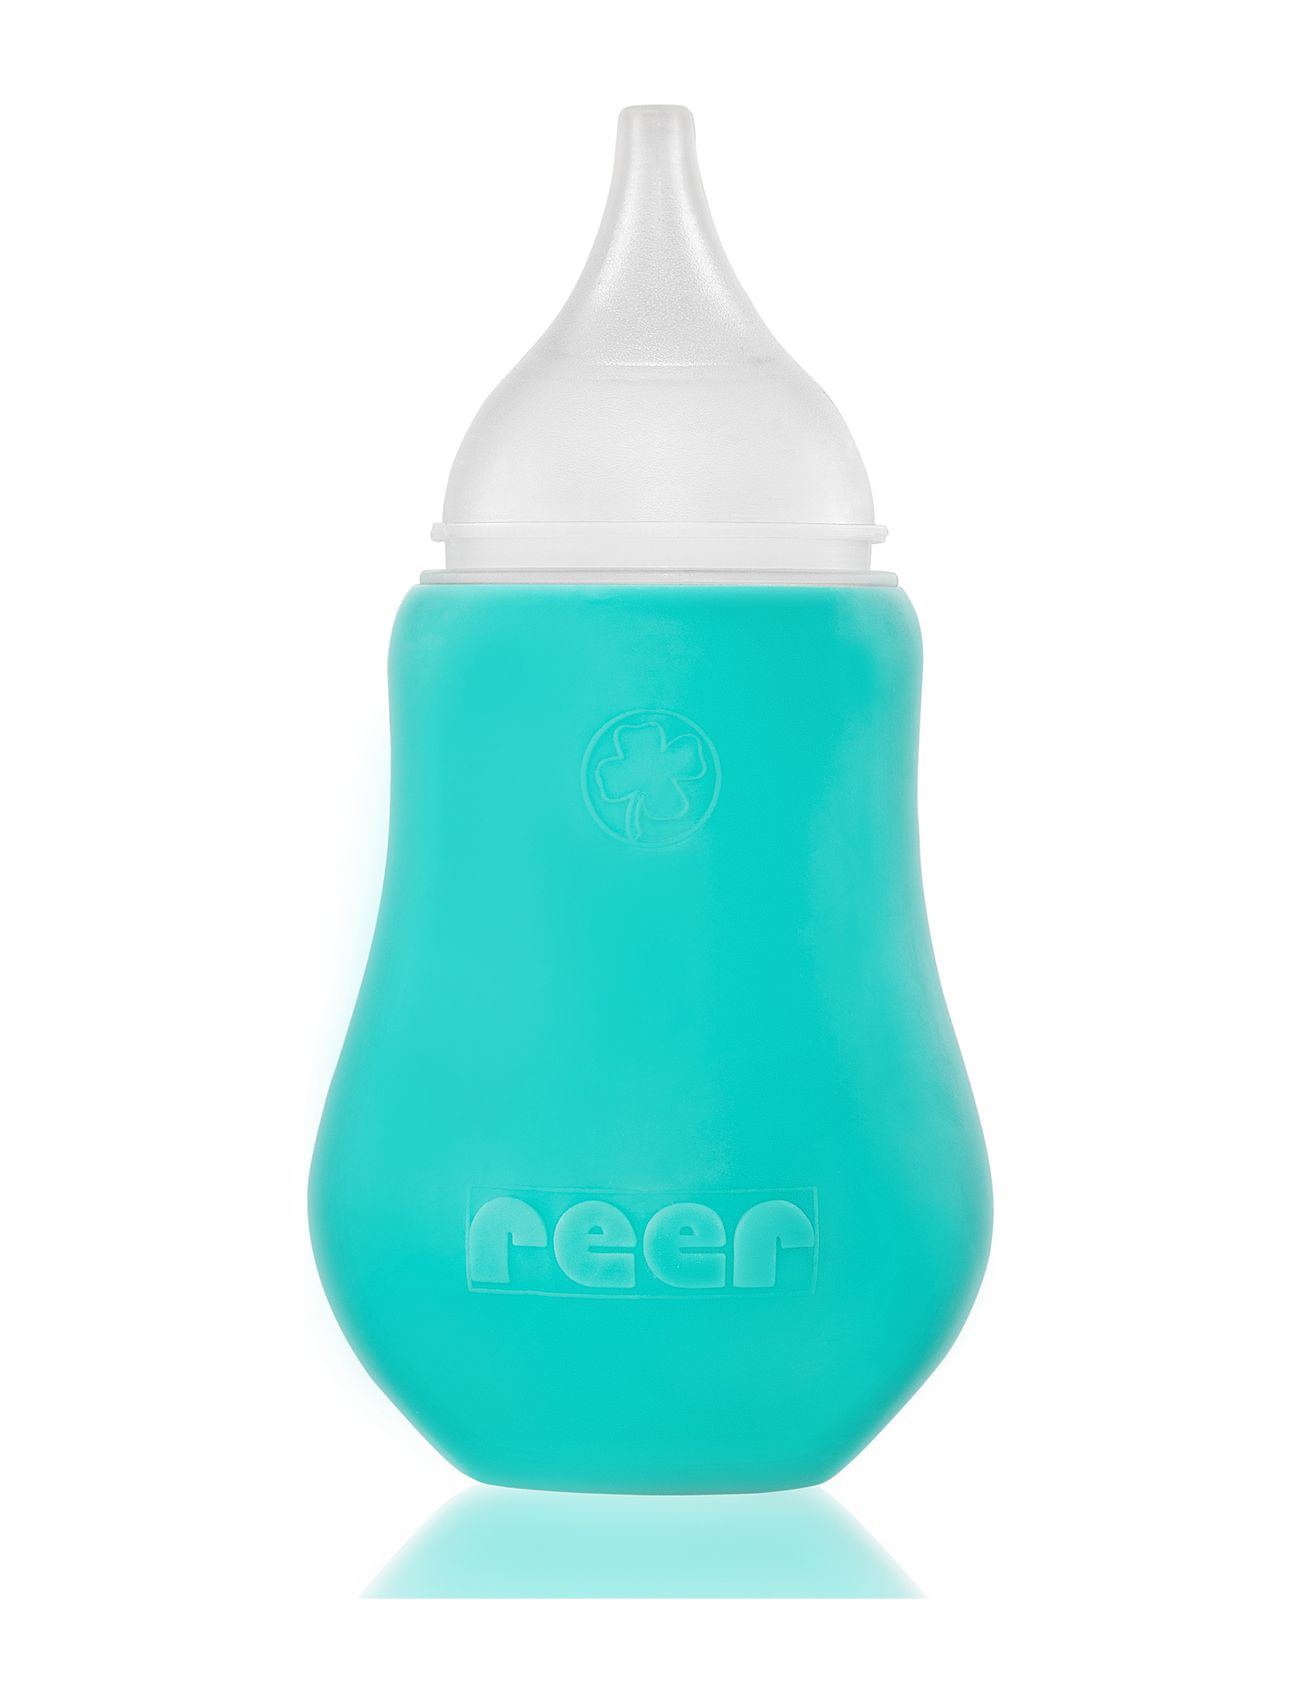 Safety Nasal Aspirator Soft&Clean Baby & Maternity Care & Hygiene Baby Care Green Reer